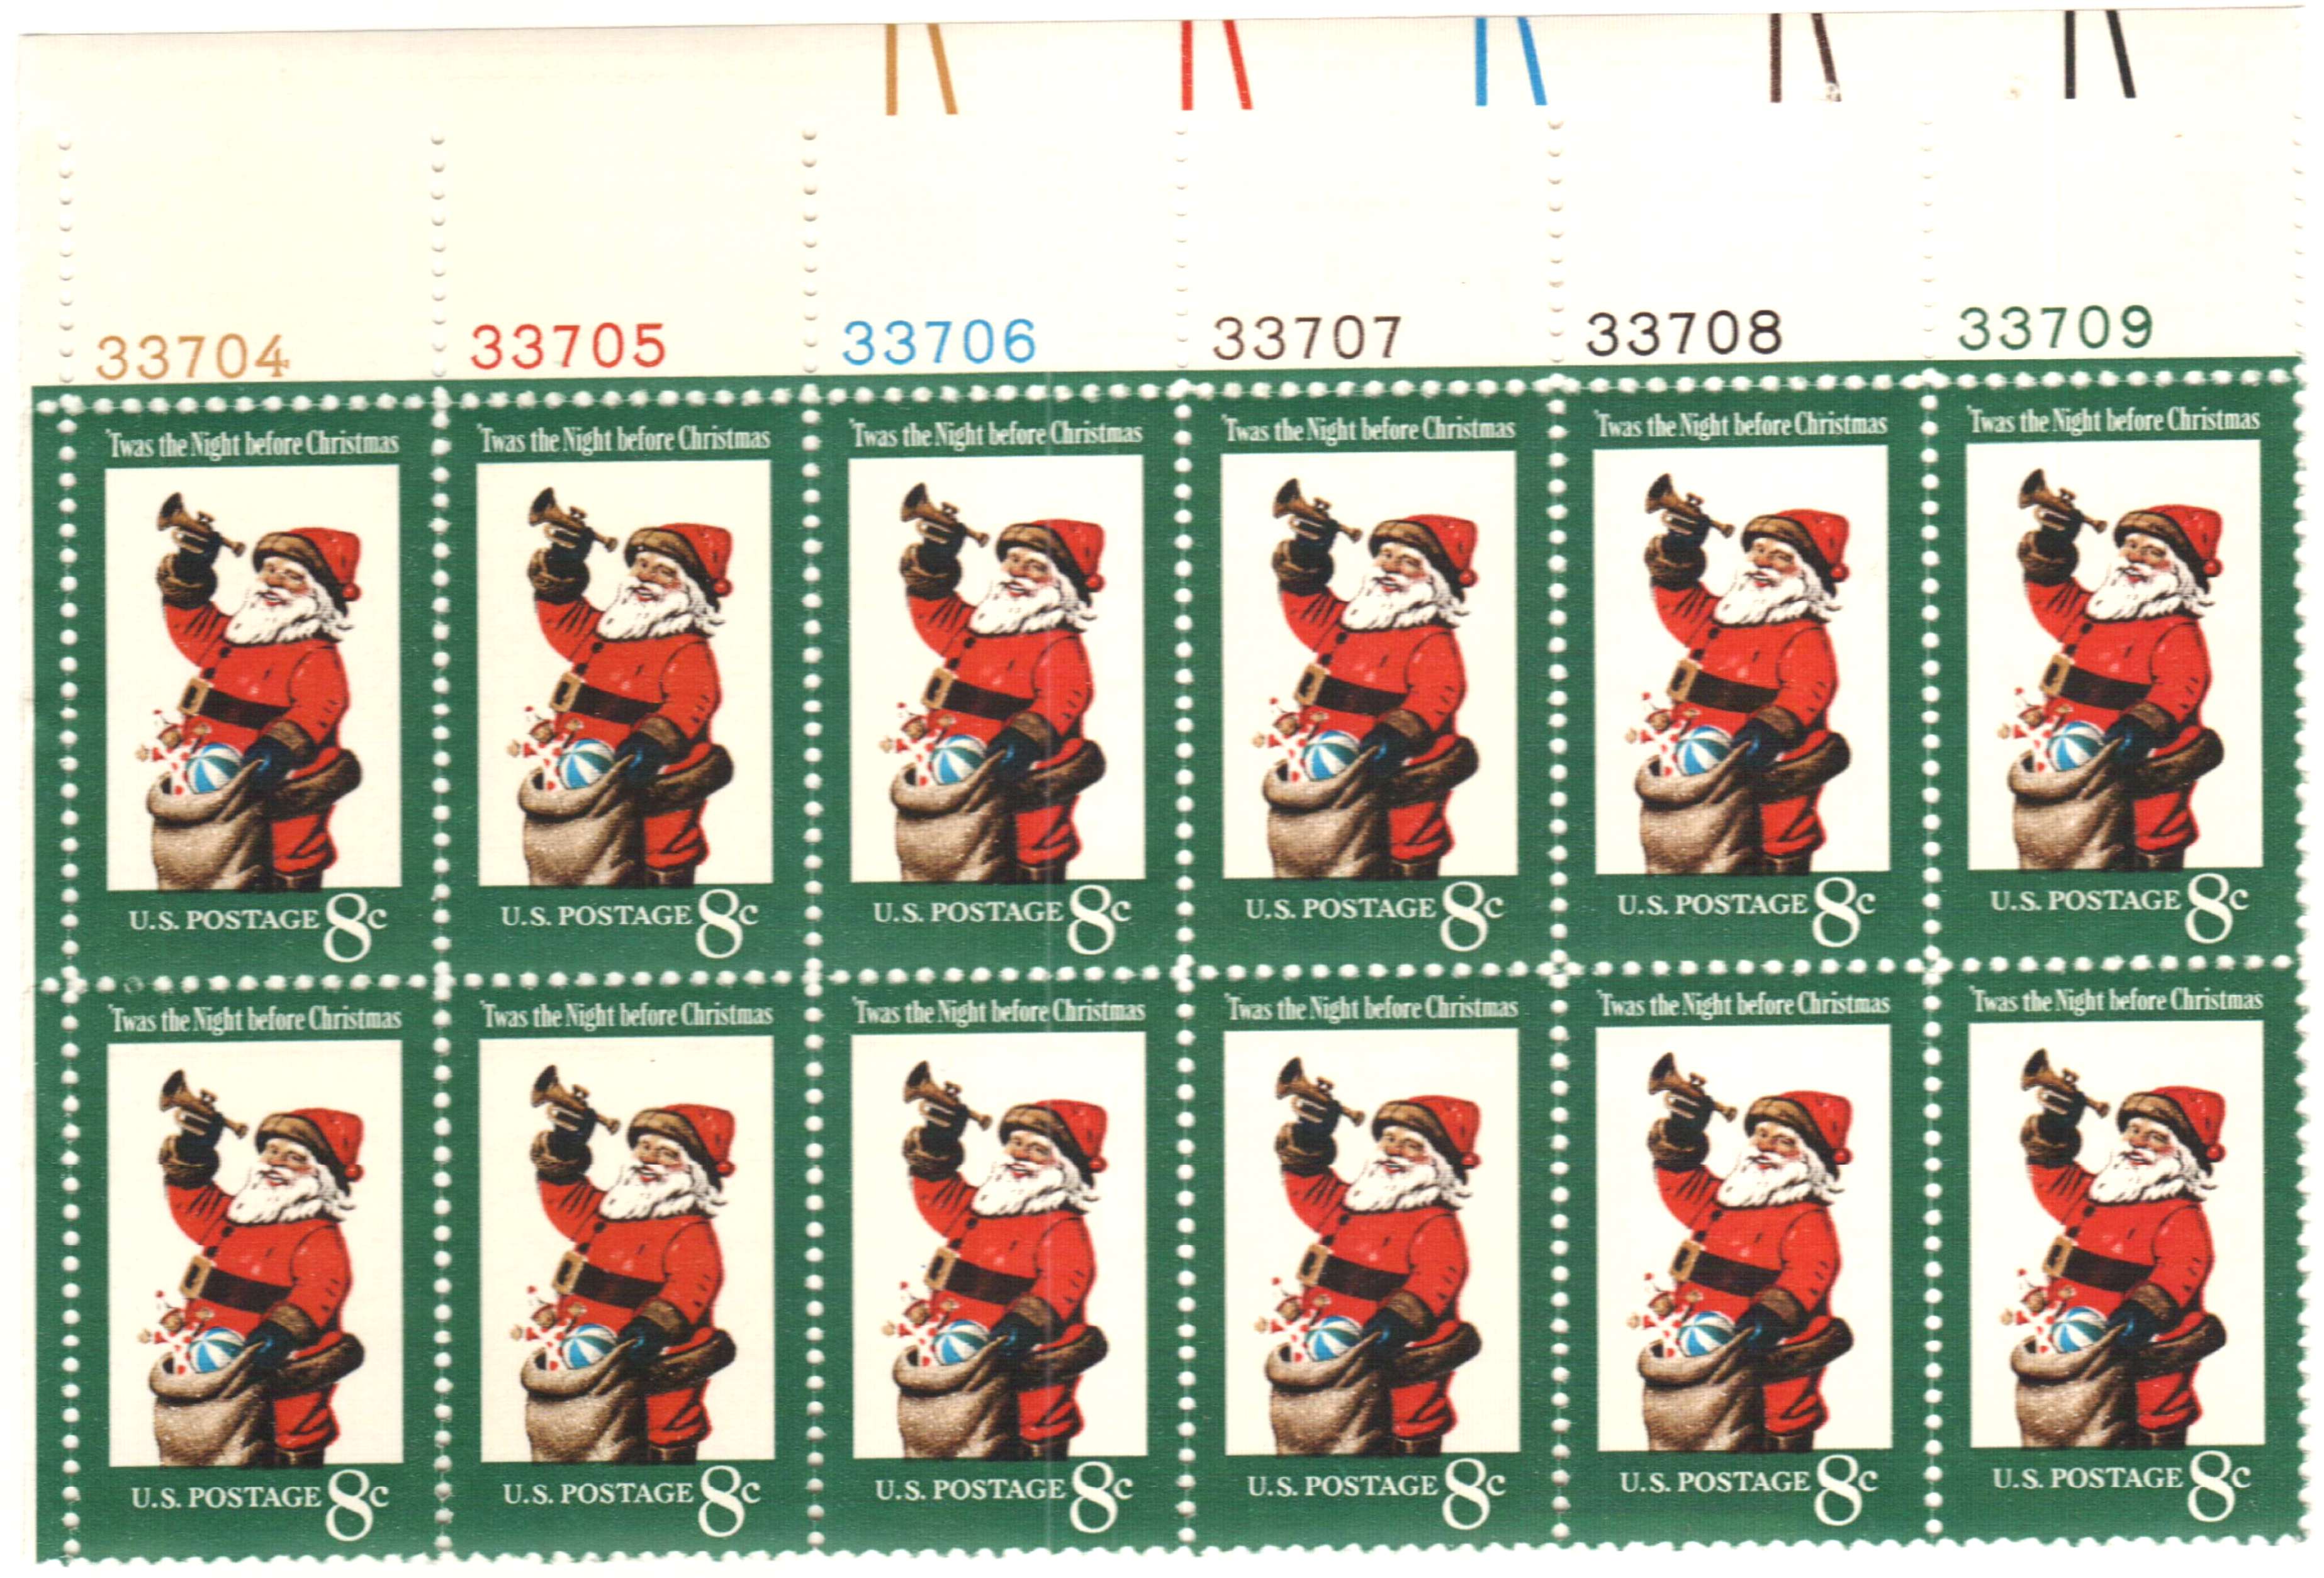 United States Postage Stamp 8 Cents 'Twas the Night before Christmas  Canceled